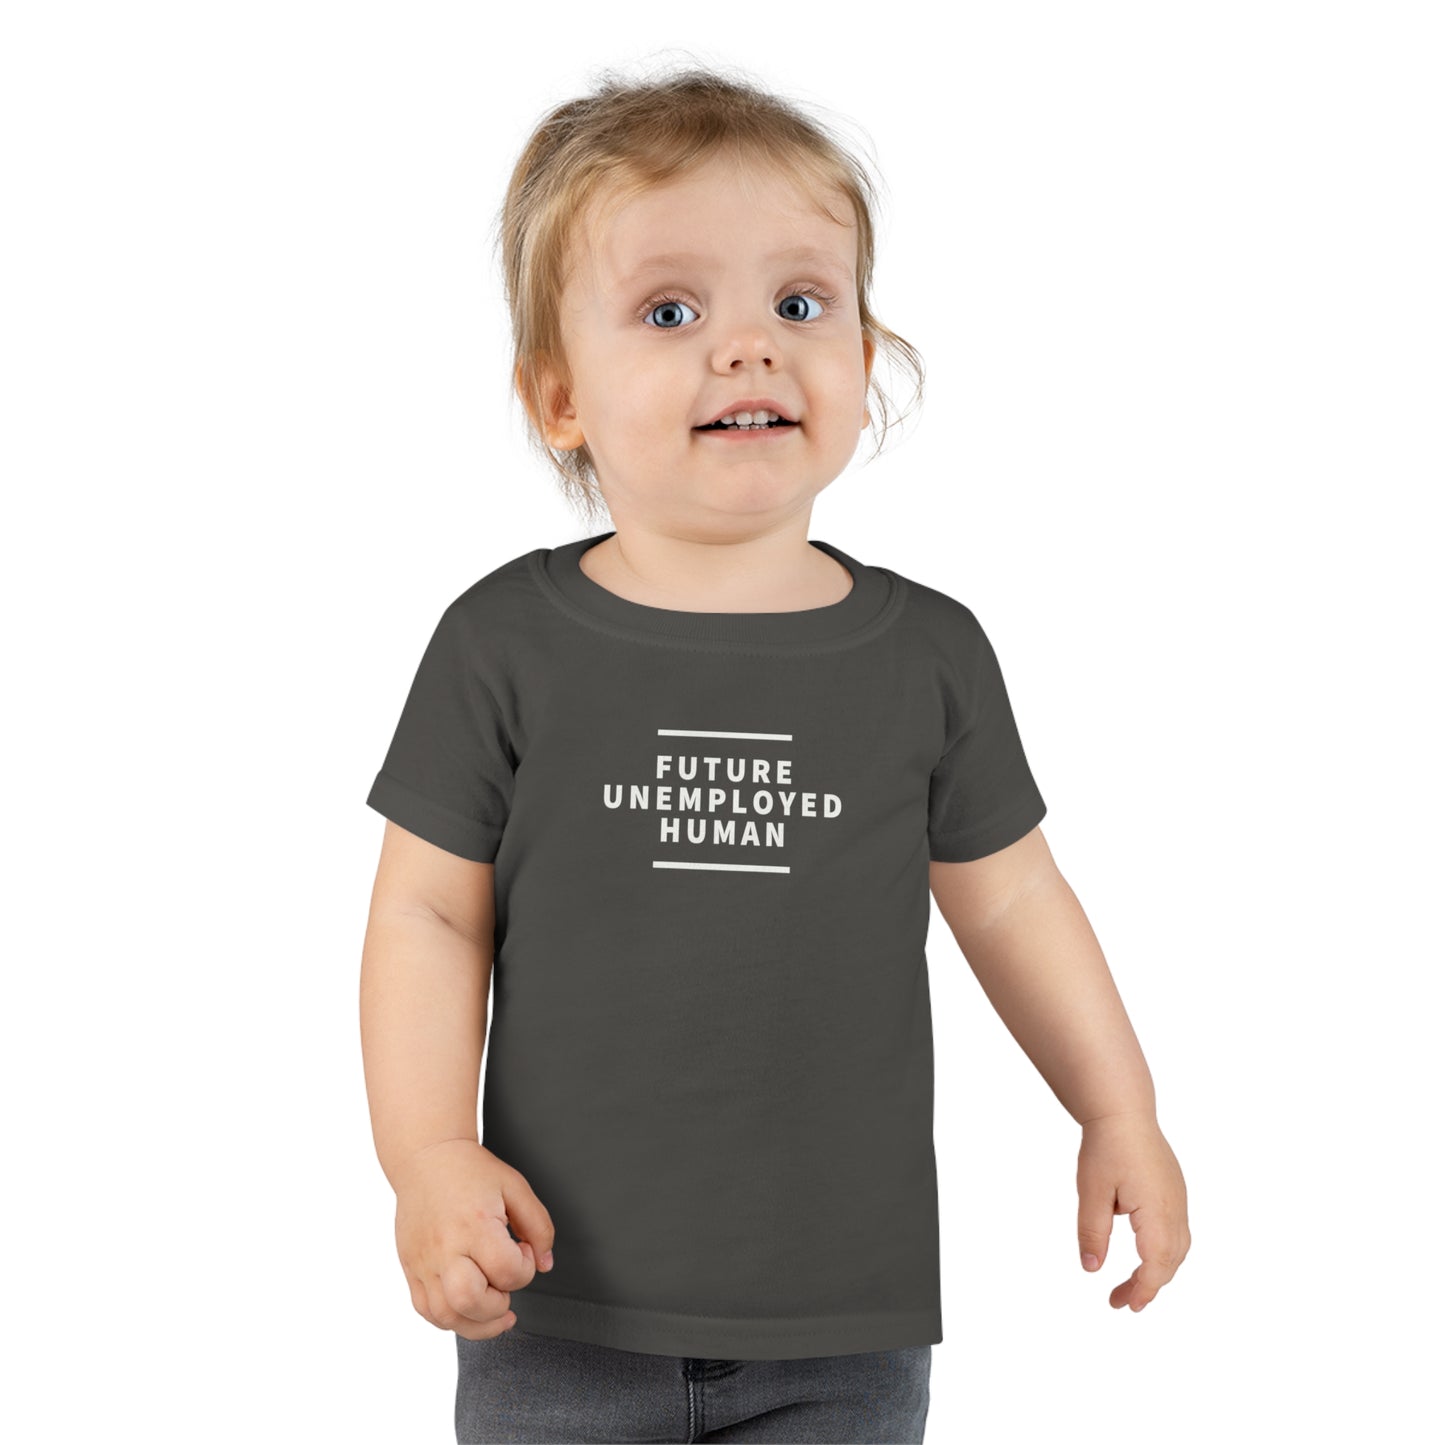 "FUTURE UNEMPLOYED HUMAN" Blk or Wht Text Multiple Colors Toddler T-shirt